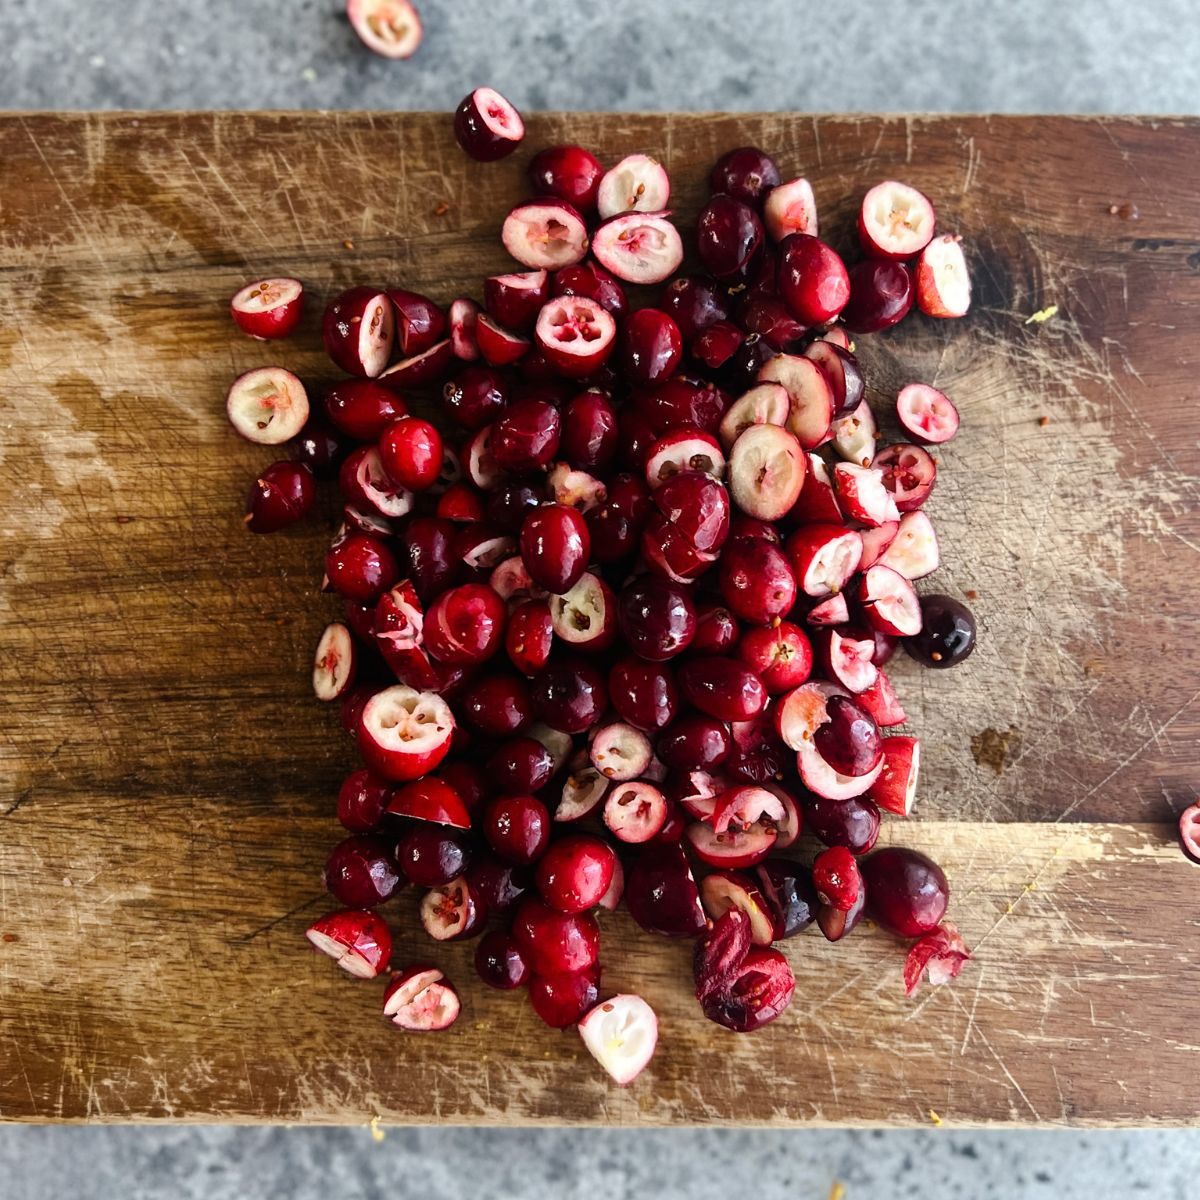 Chopped cranberries on a wooden cutting board.